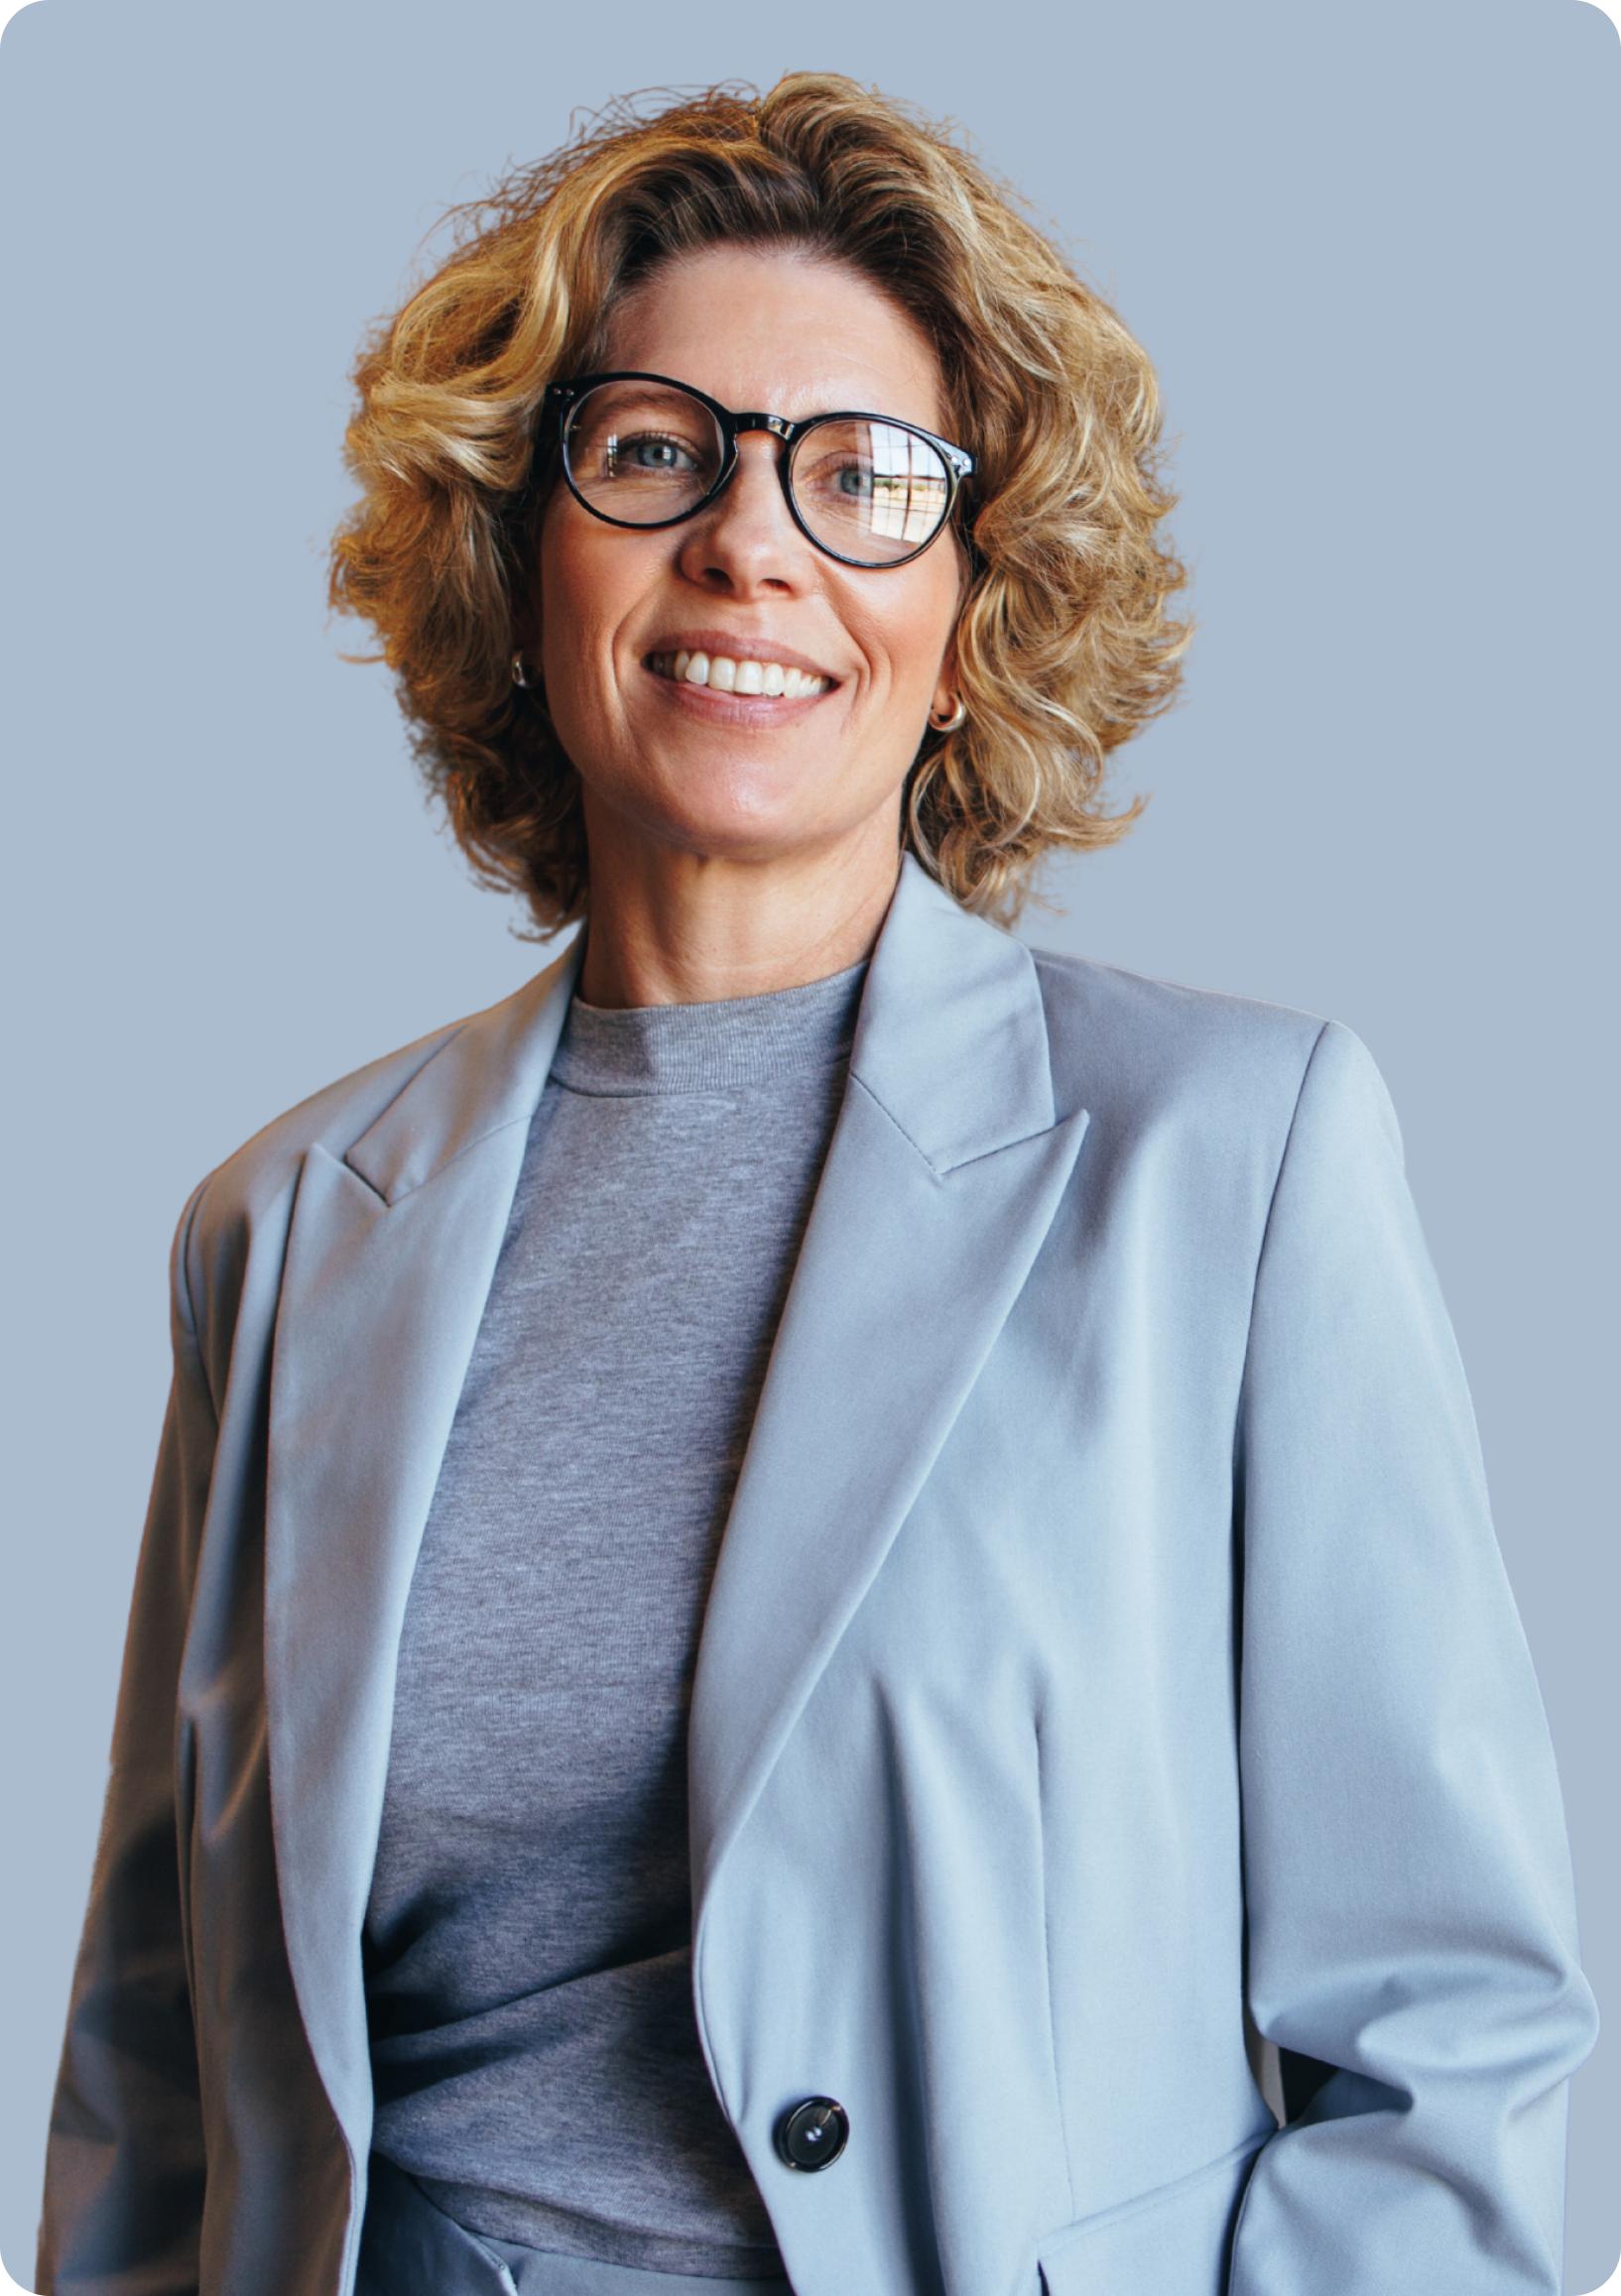 A woman wearing glasses and a blue jacket is smiling.